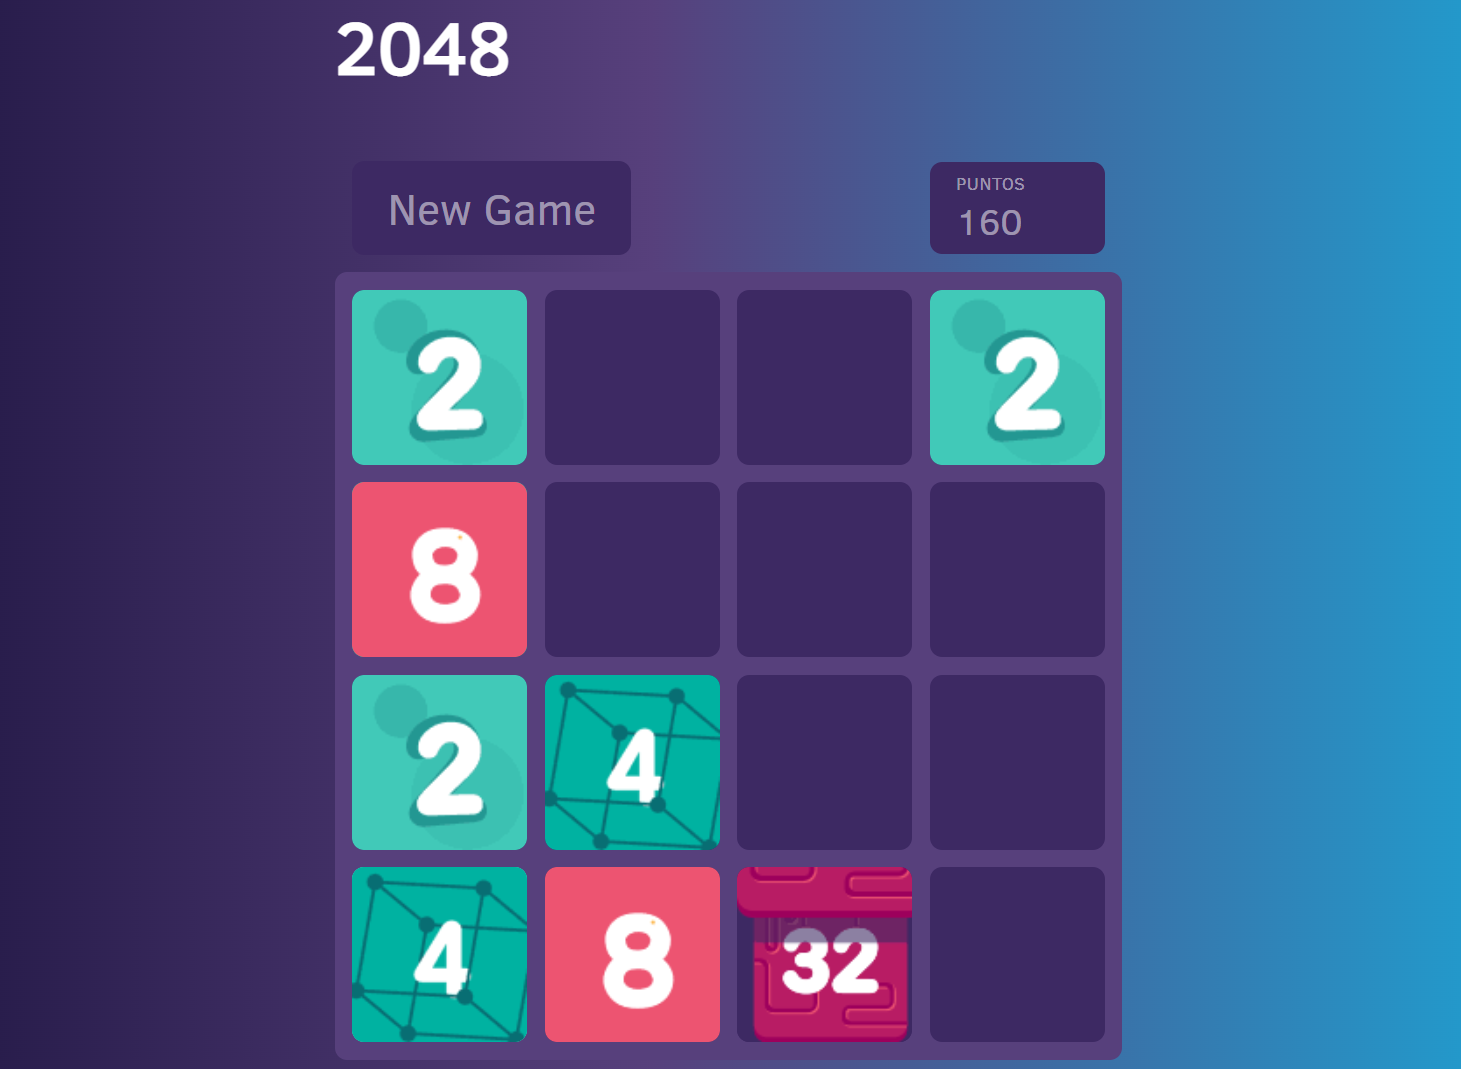 2048 game - Animated edition